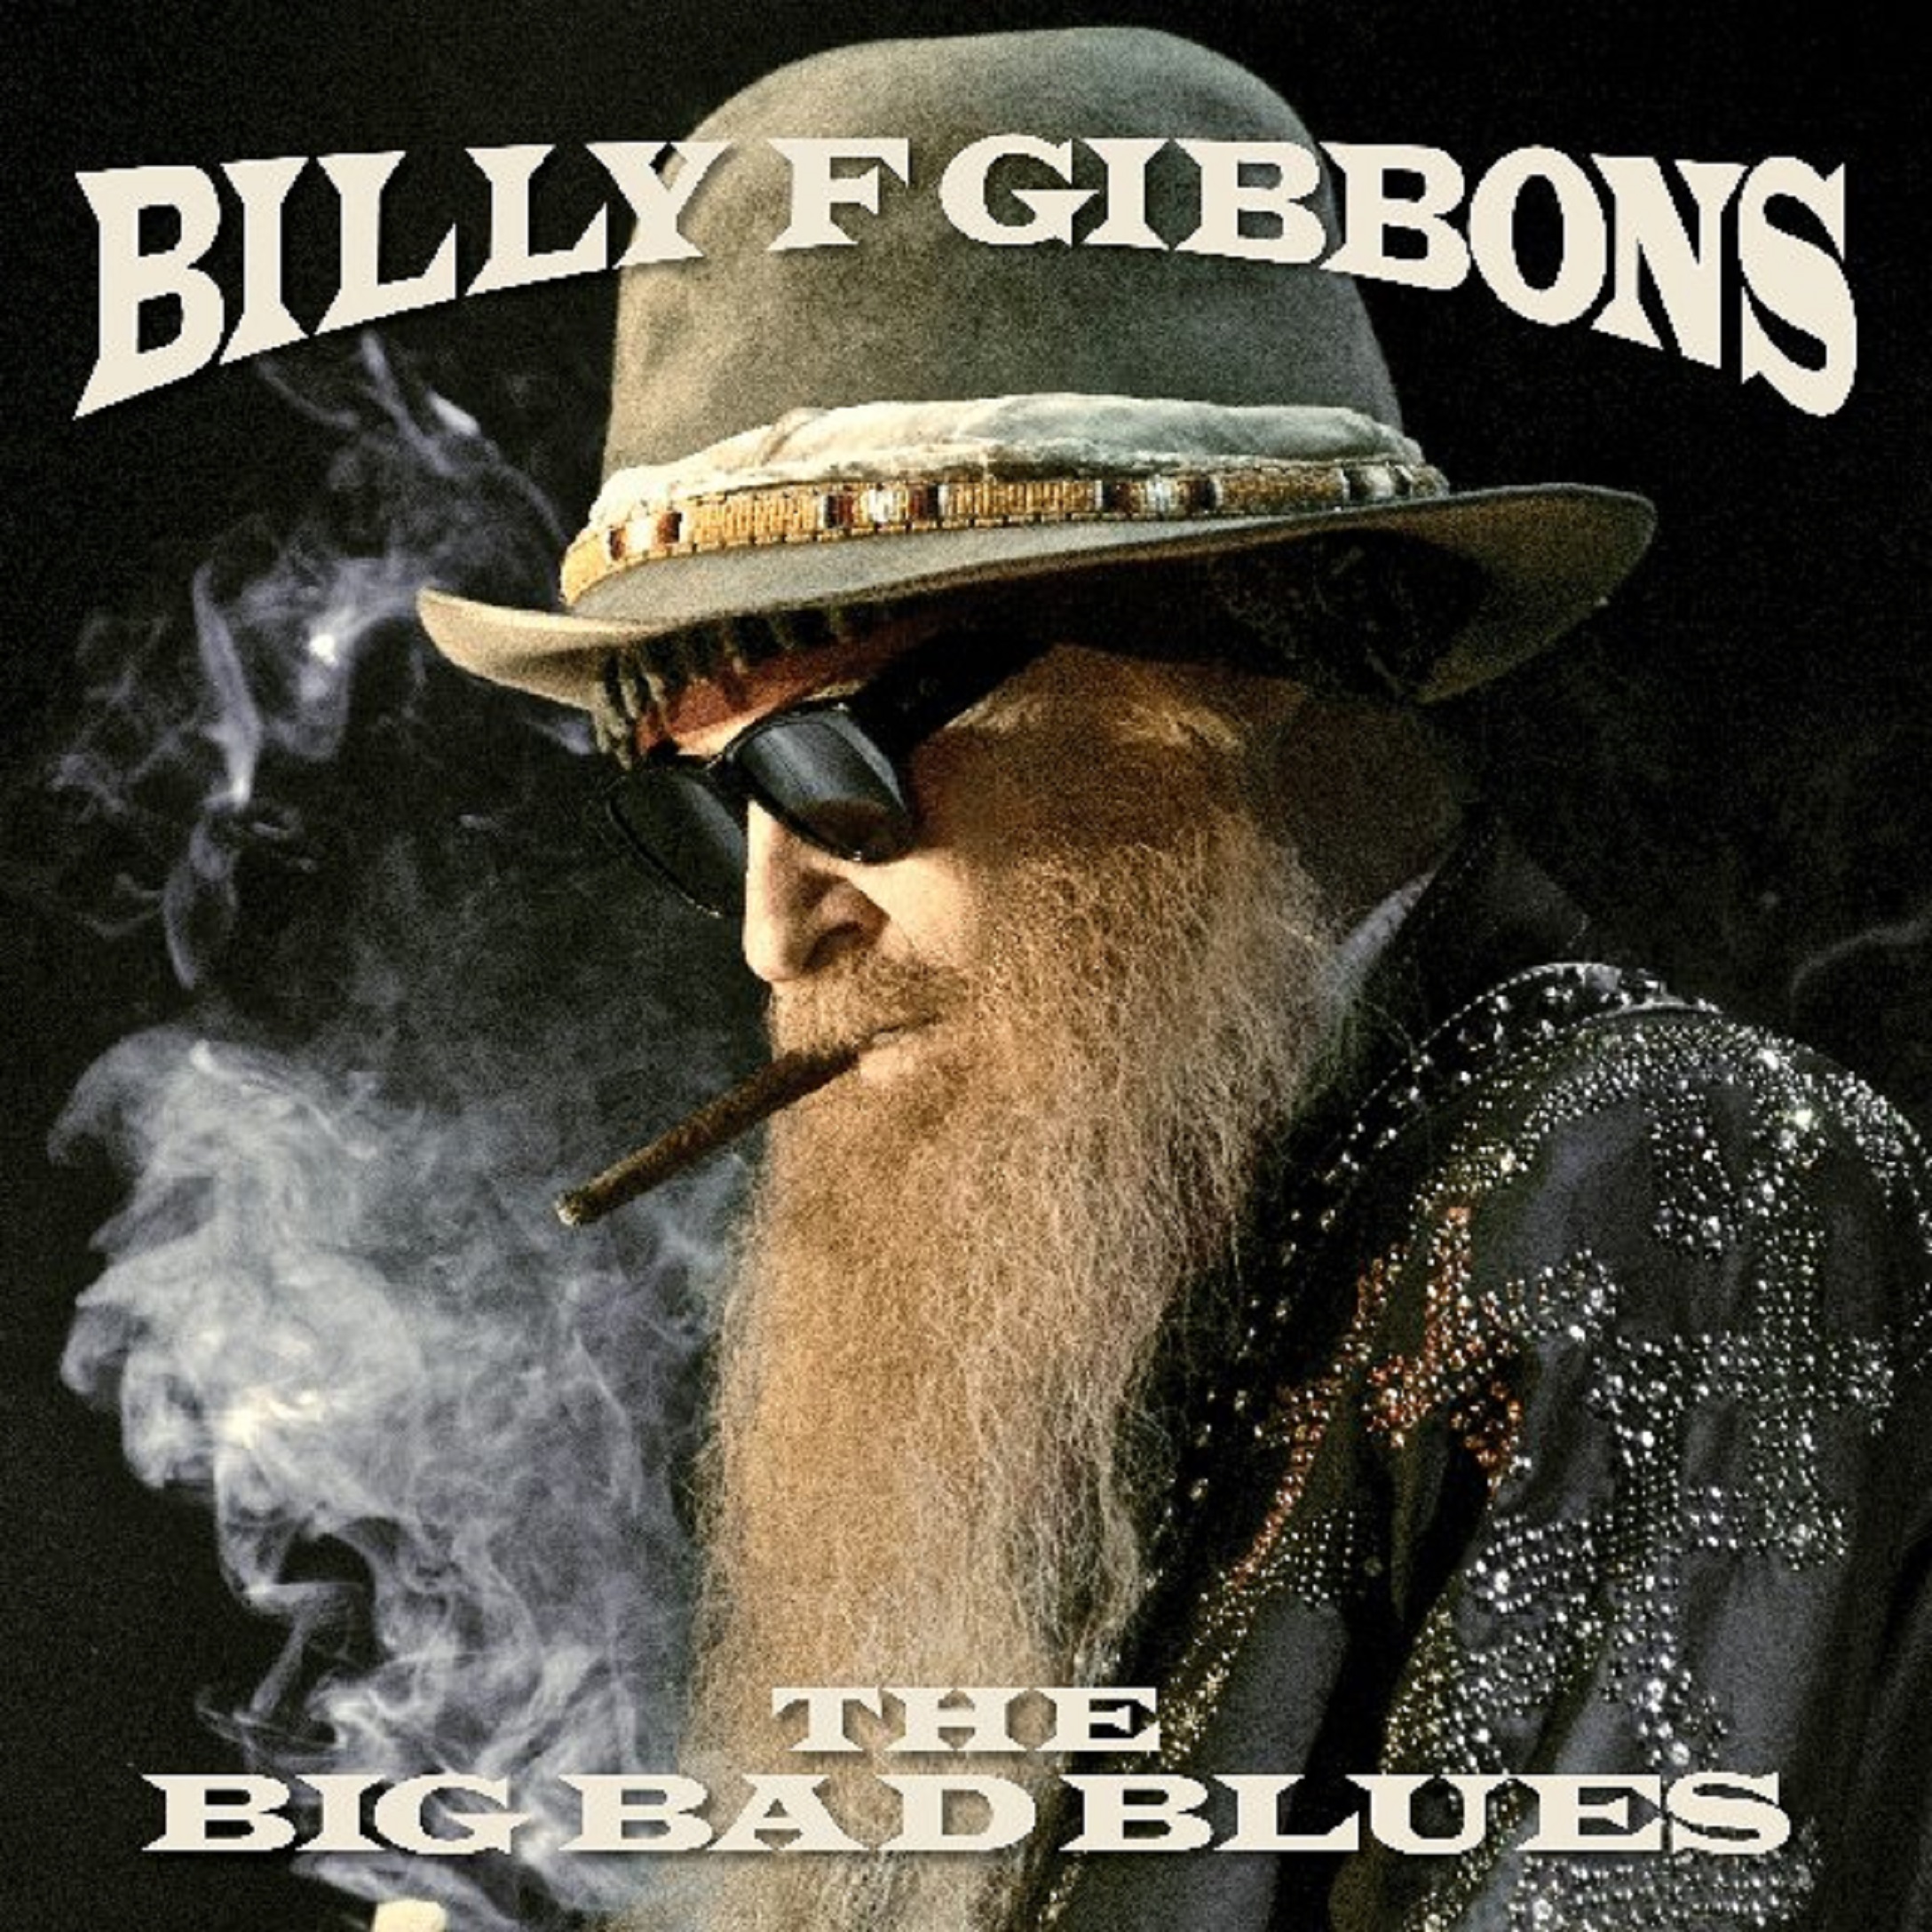 Billy Gibbons brings his "Big Bad Blues" Tour to The Cabot